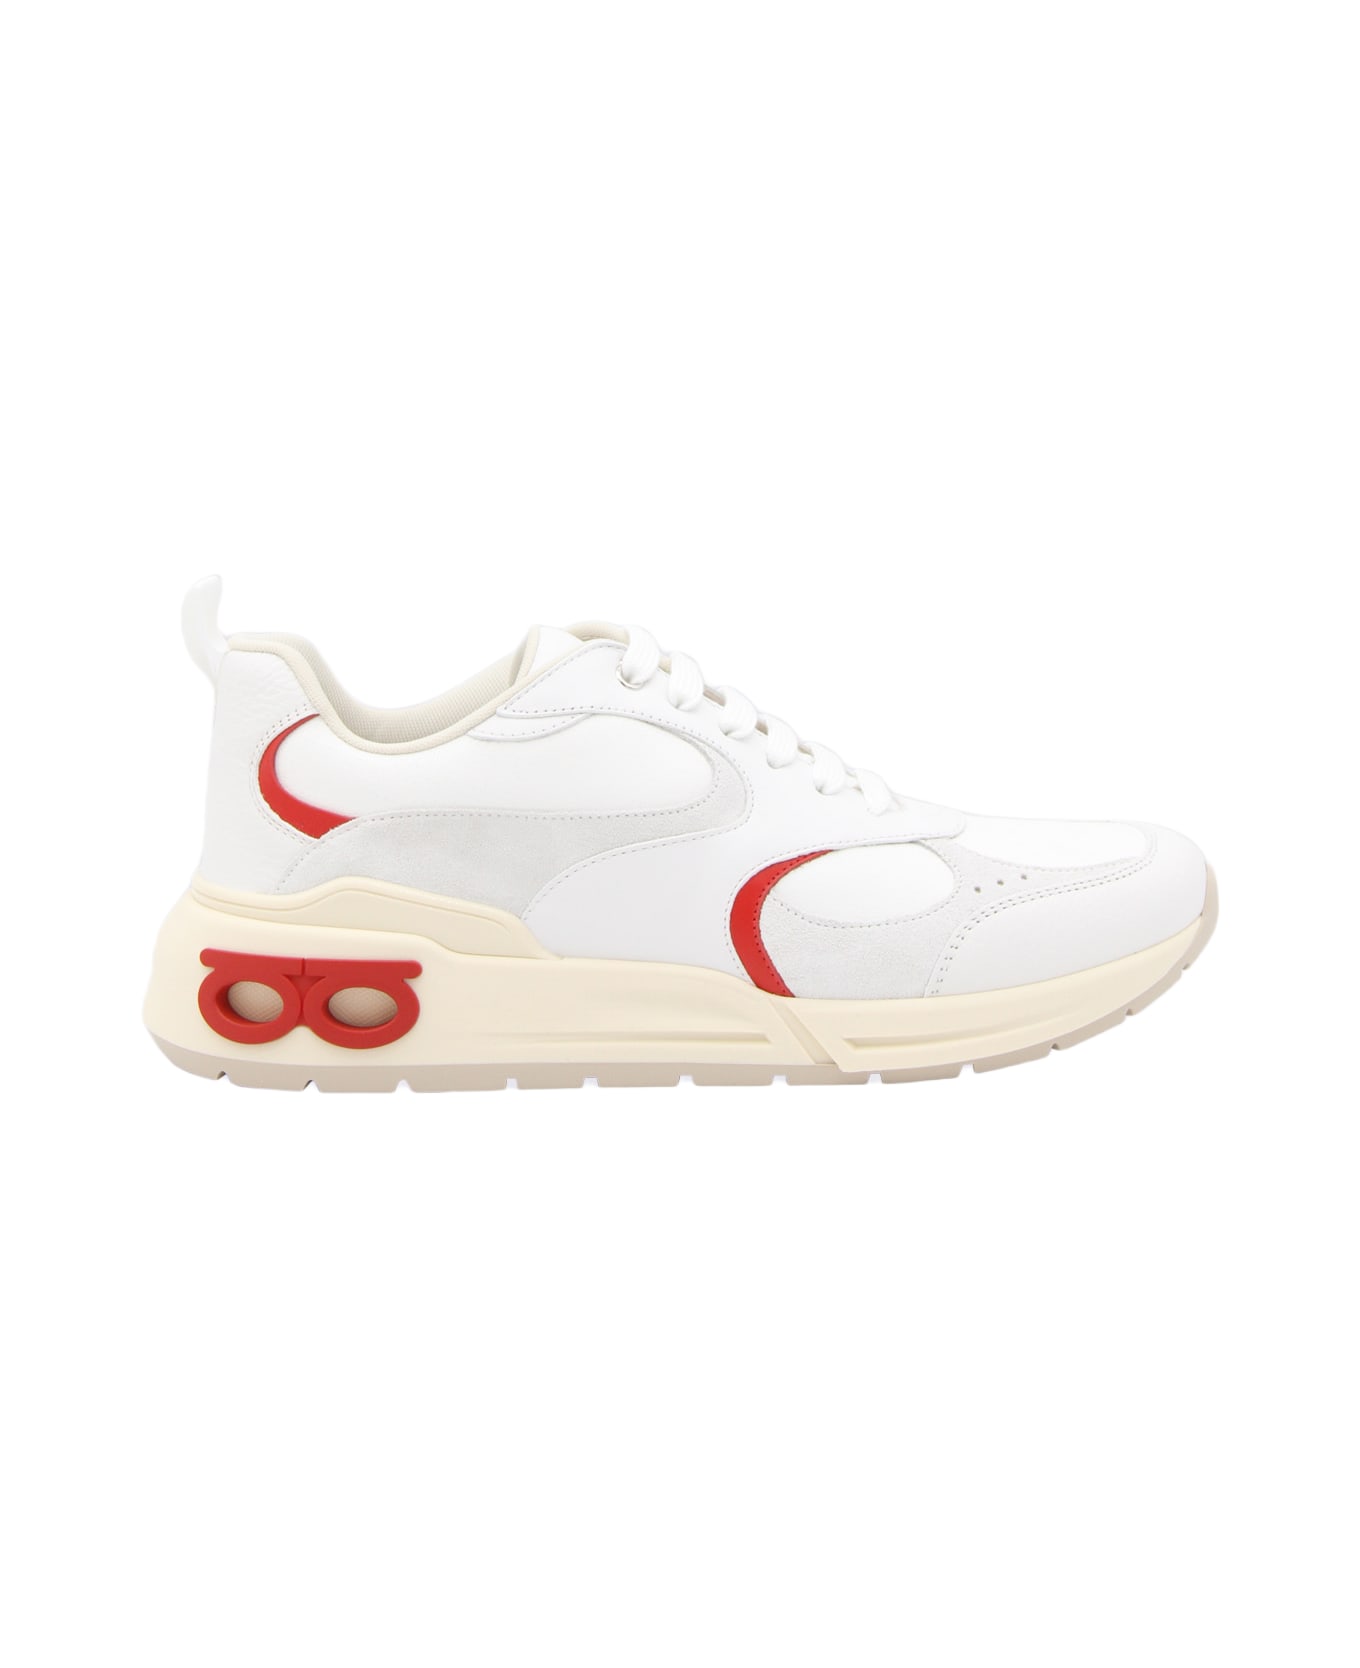 Ferragamo White And Red Leather Sneakers - White